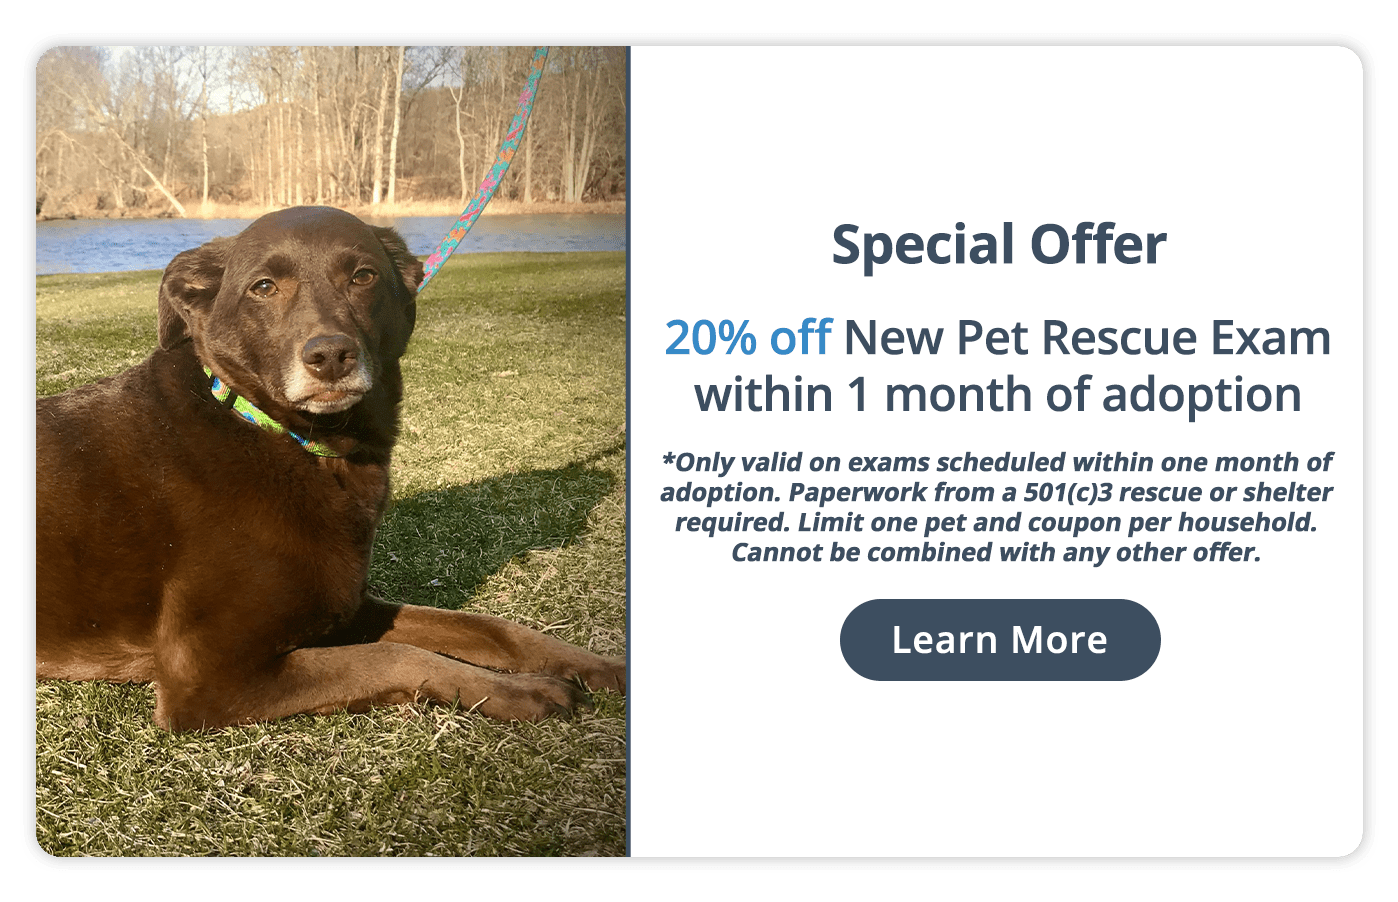 Special Offer! 20% off New Pet Rescue Exam within 1 month of adoption!